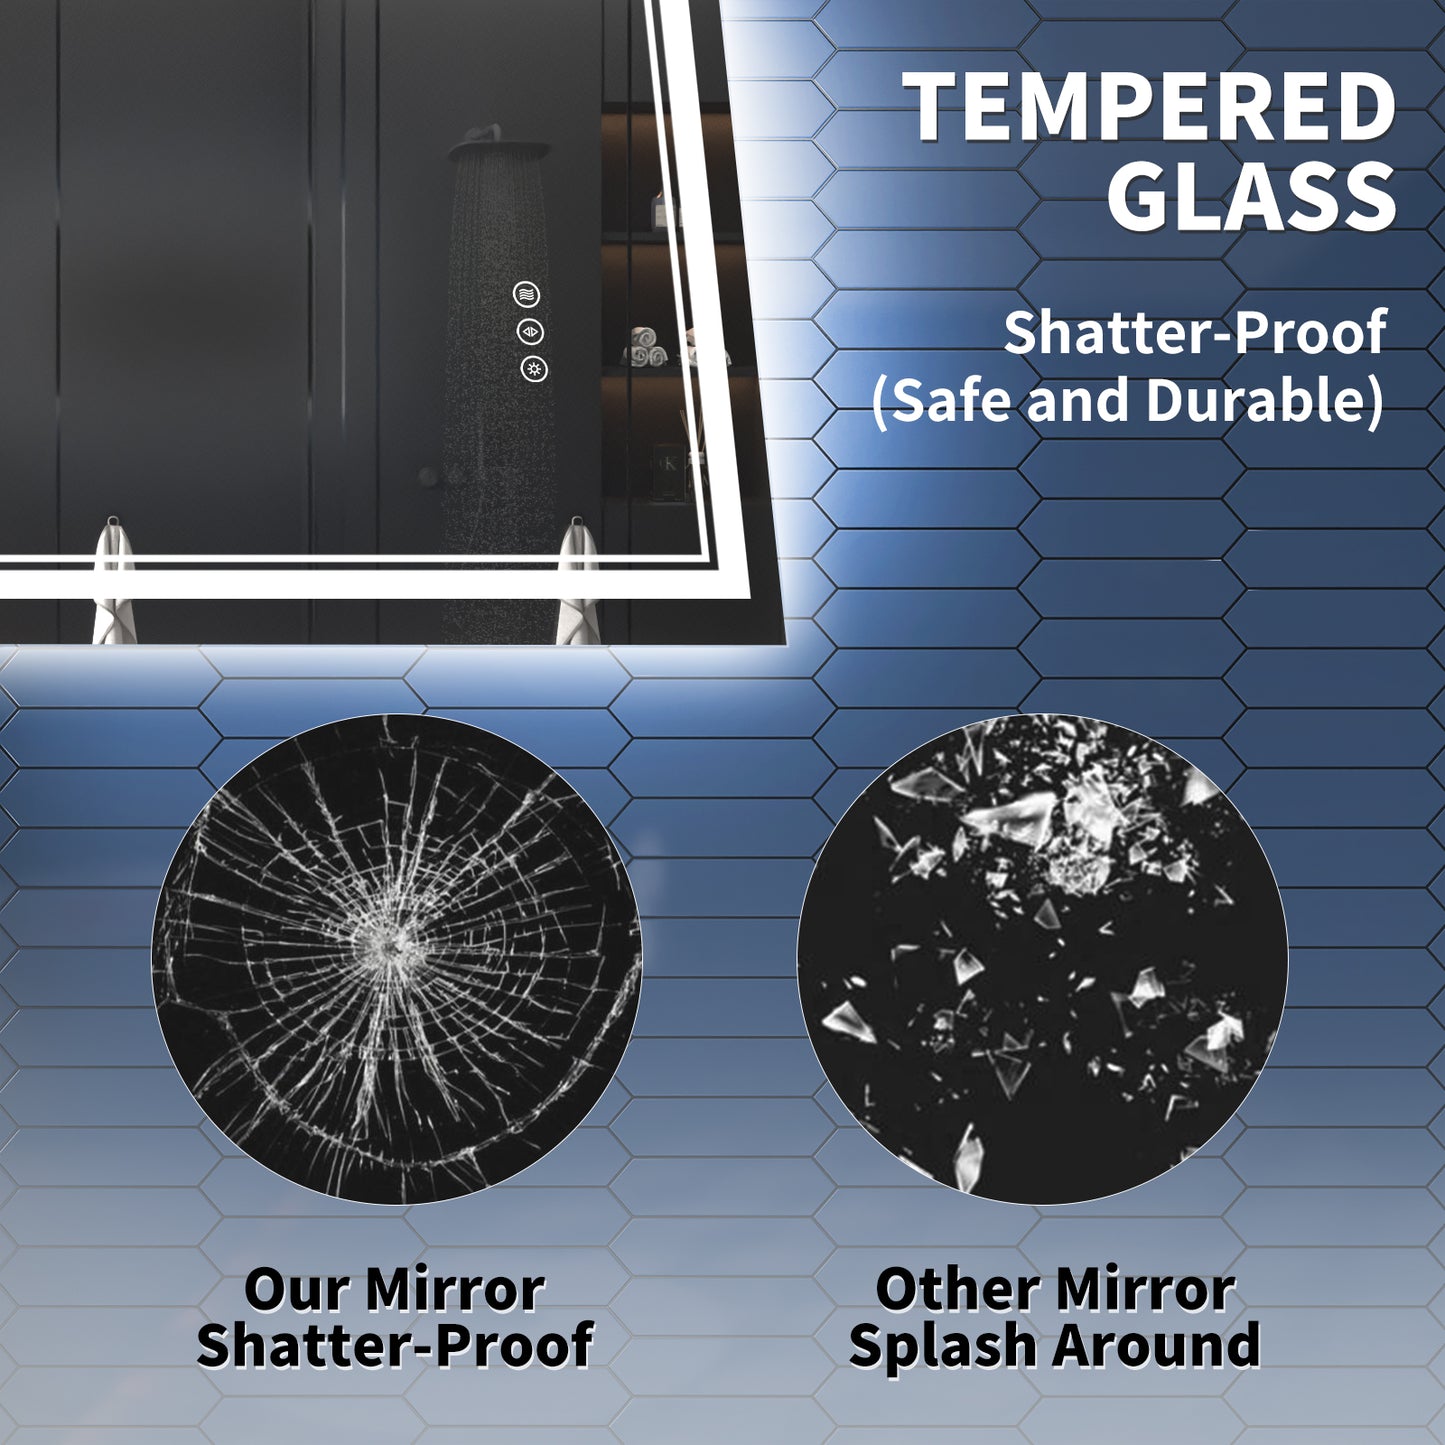 Linea 40" W x 32" H LED Heated Bathroom Mirror,Anti Fog,Dimmable,Front-Lighted and Backlit, Tempered Glass